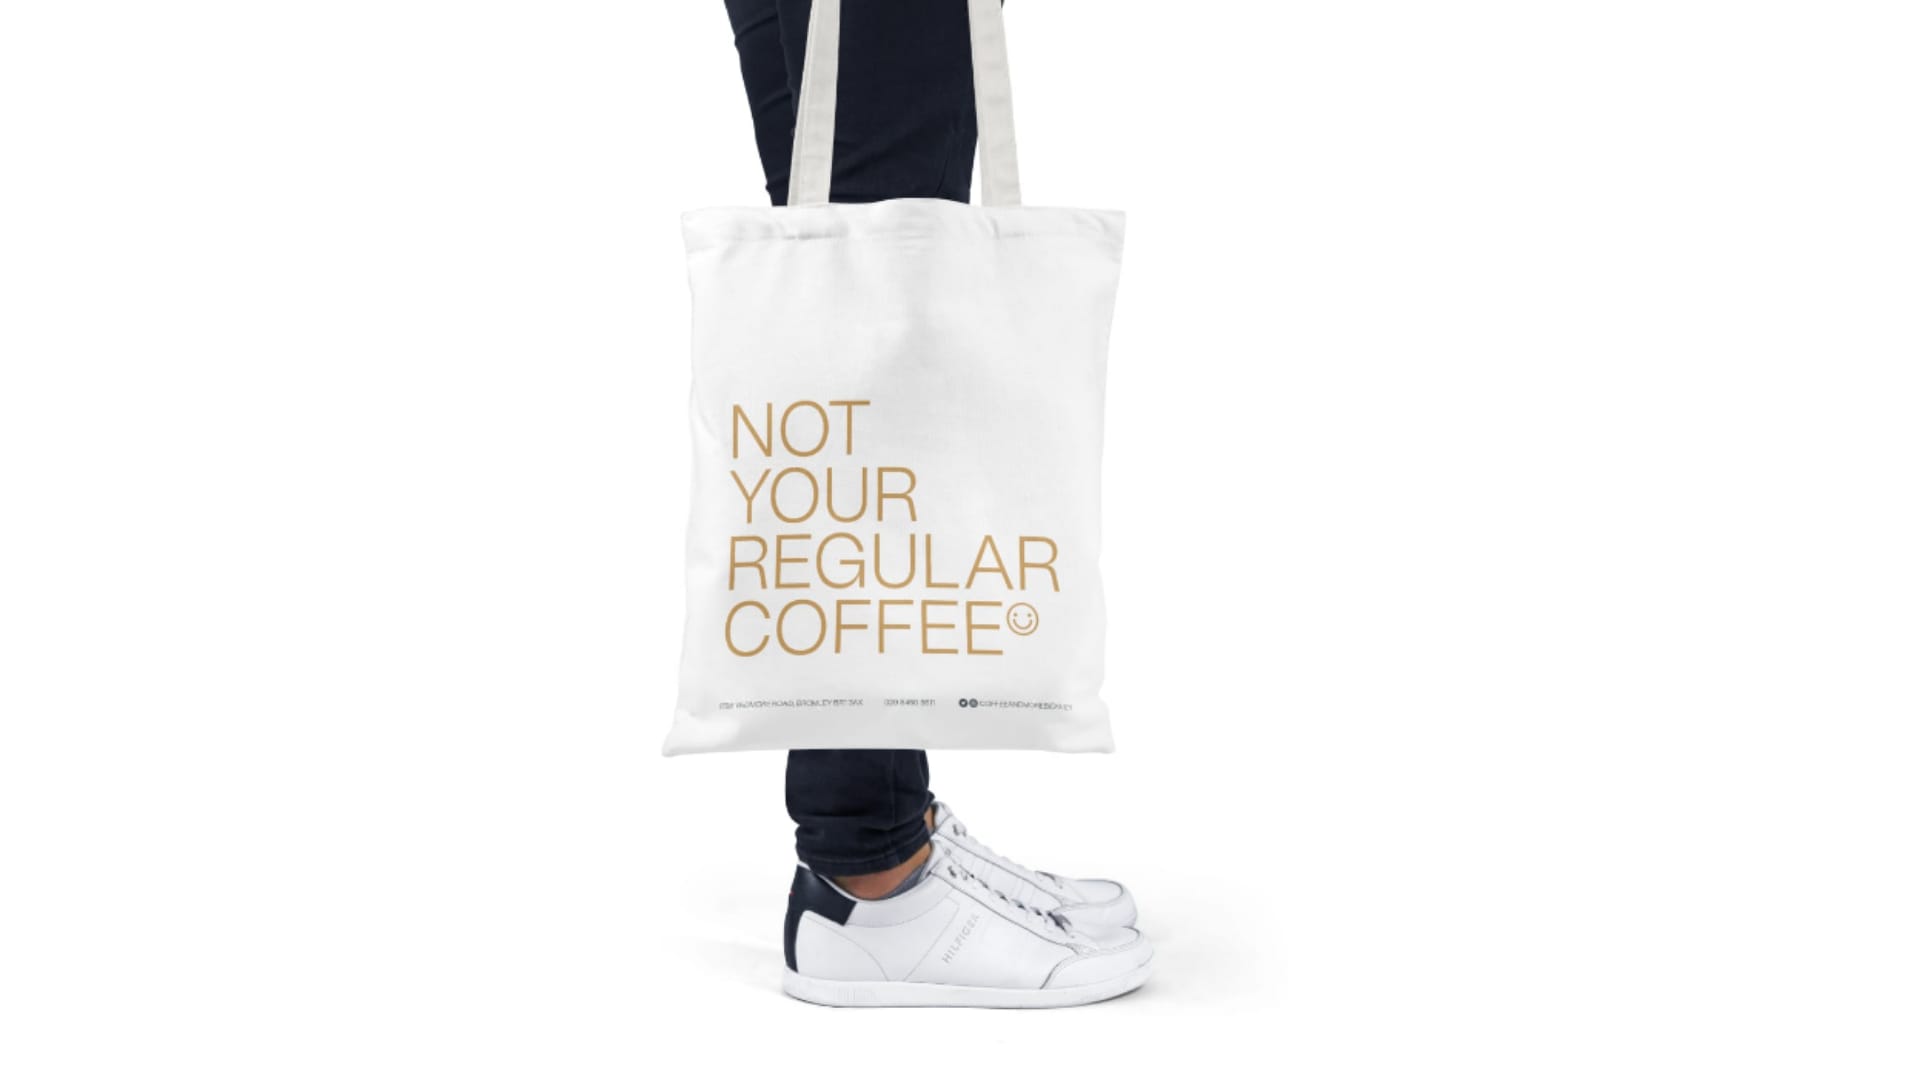 A wall hanging with coffee illustrations and he slogan 'Not your regular coffee'.